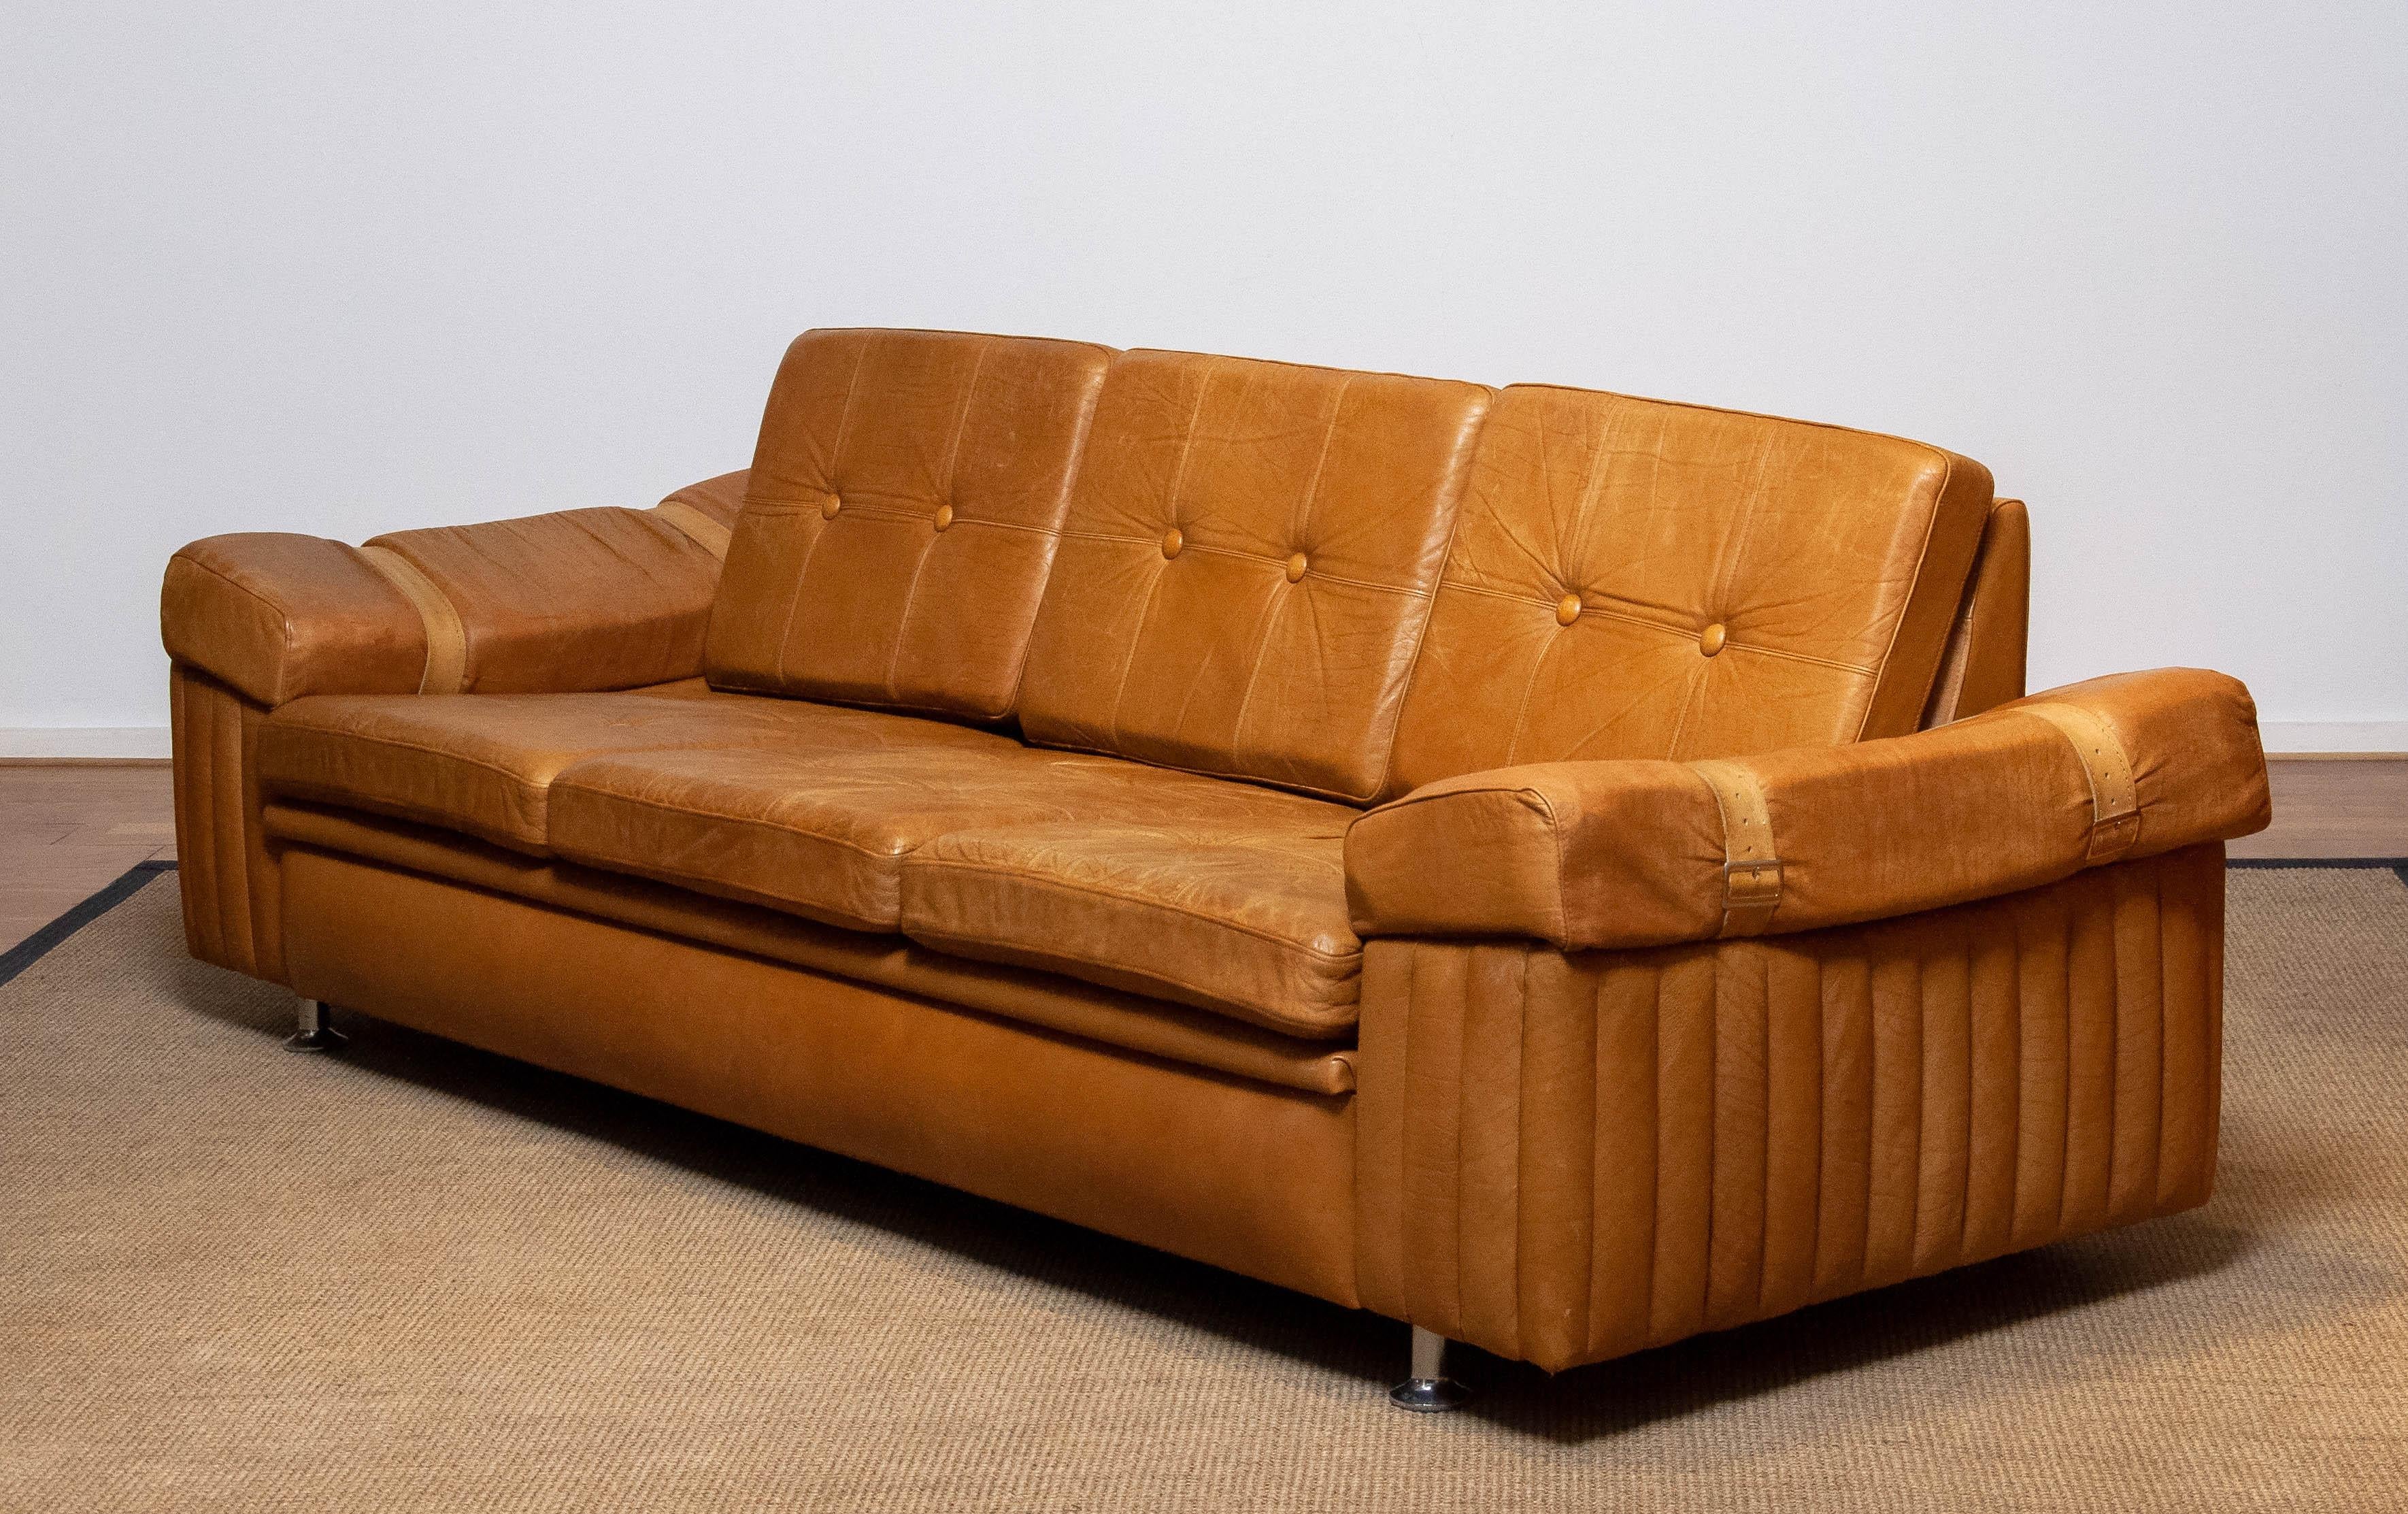 Beautiful Brutalist three-seater sofa in camel colored leather. This Scandinavian sofa makes the impression, for used materials and design and quality, that it co a Swedish product from the Norell AB Company but we can't find any related history.
We